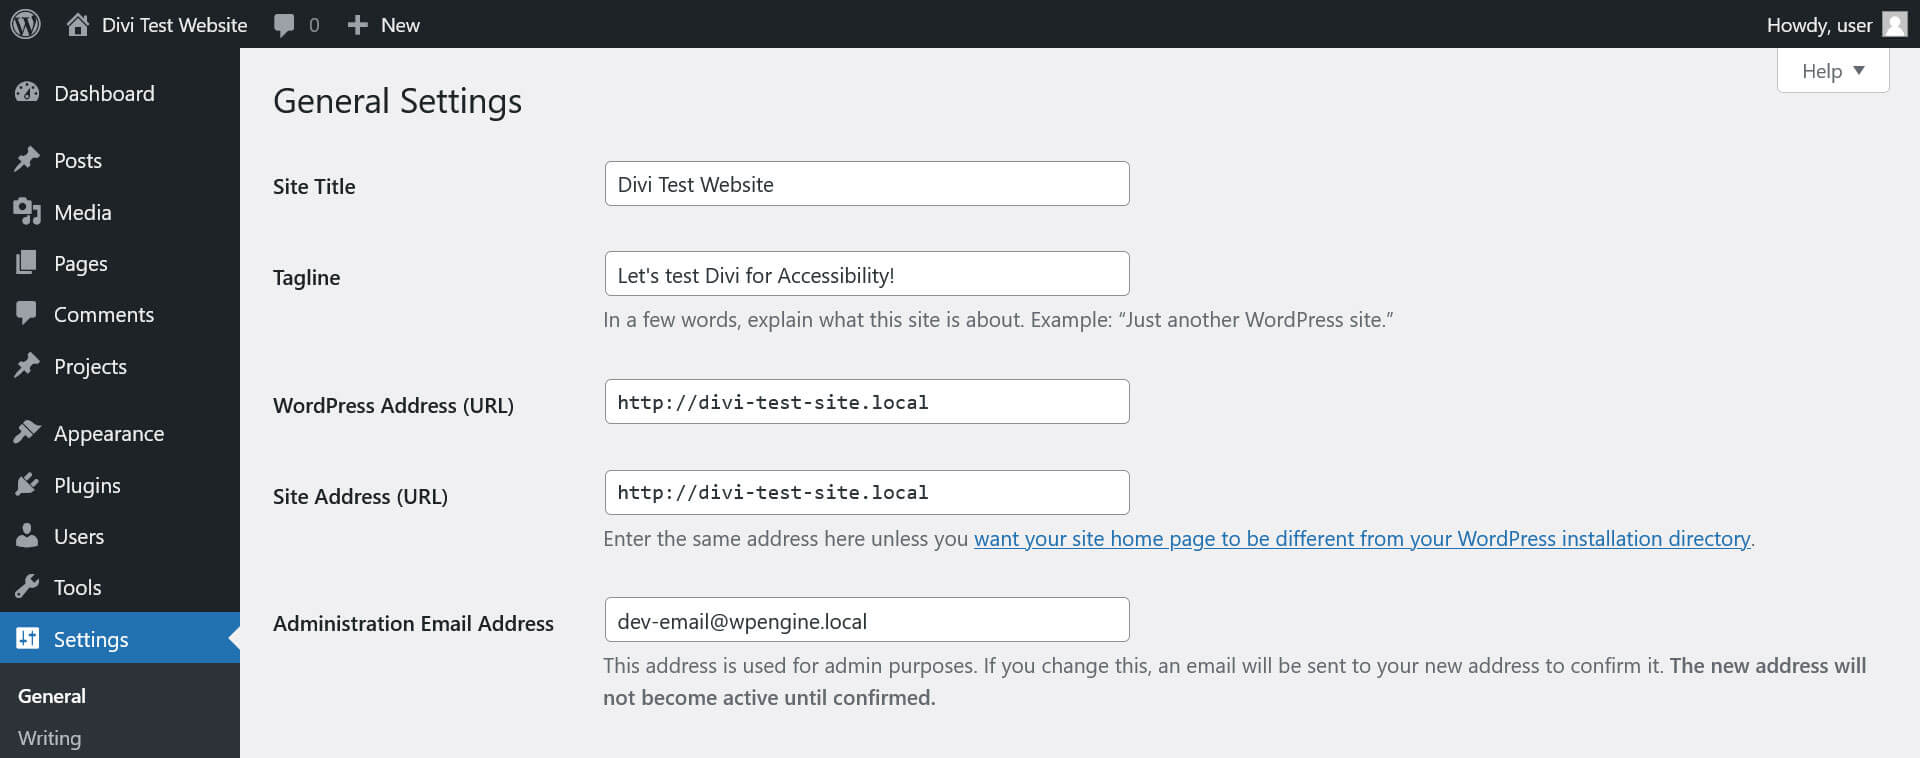 Screenshot of the settings section in WordPress where you can add a Site Title and Tagline.